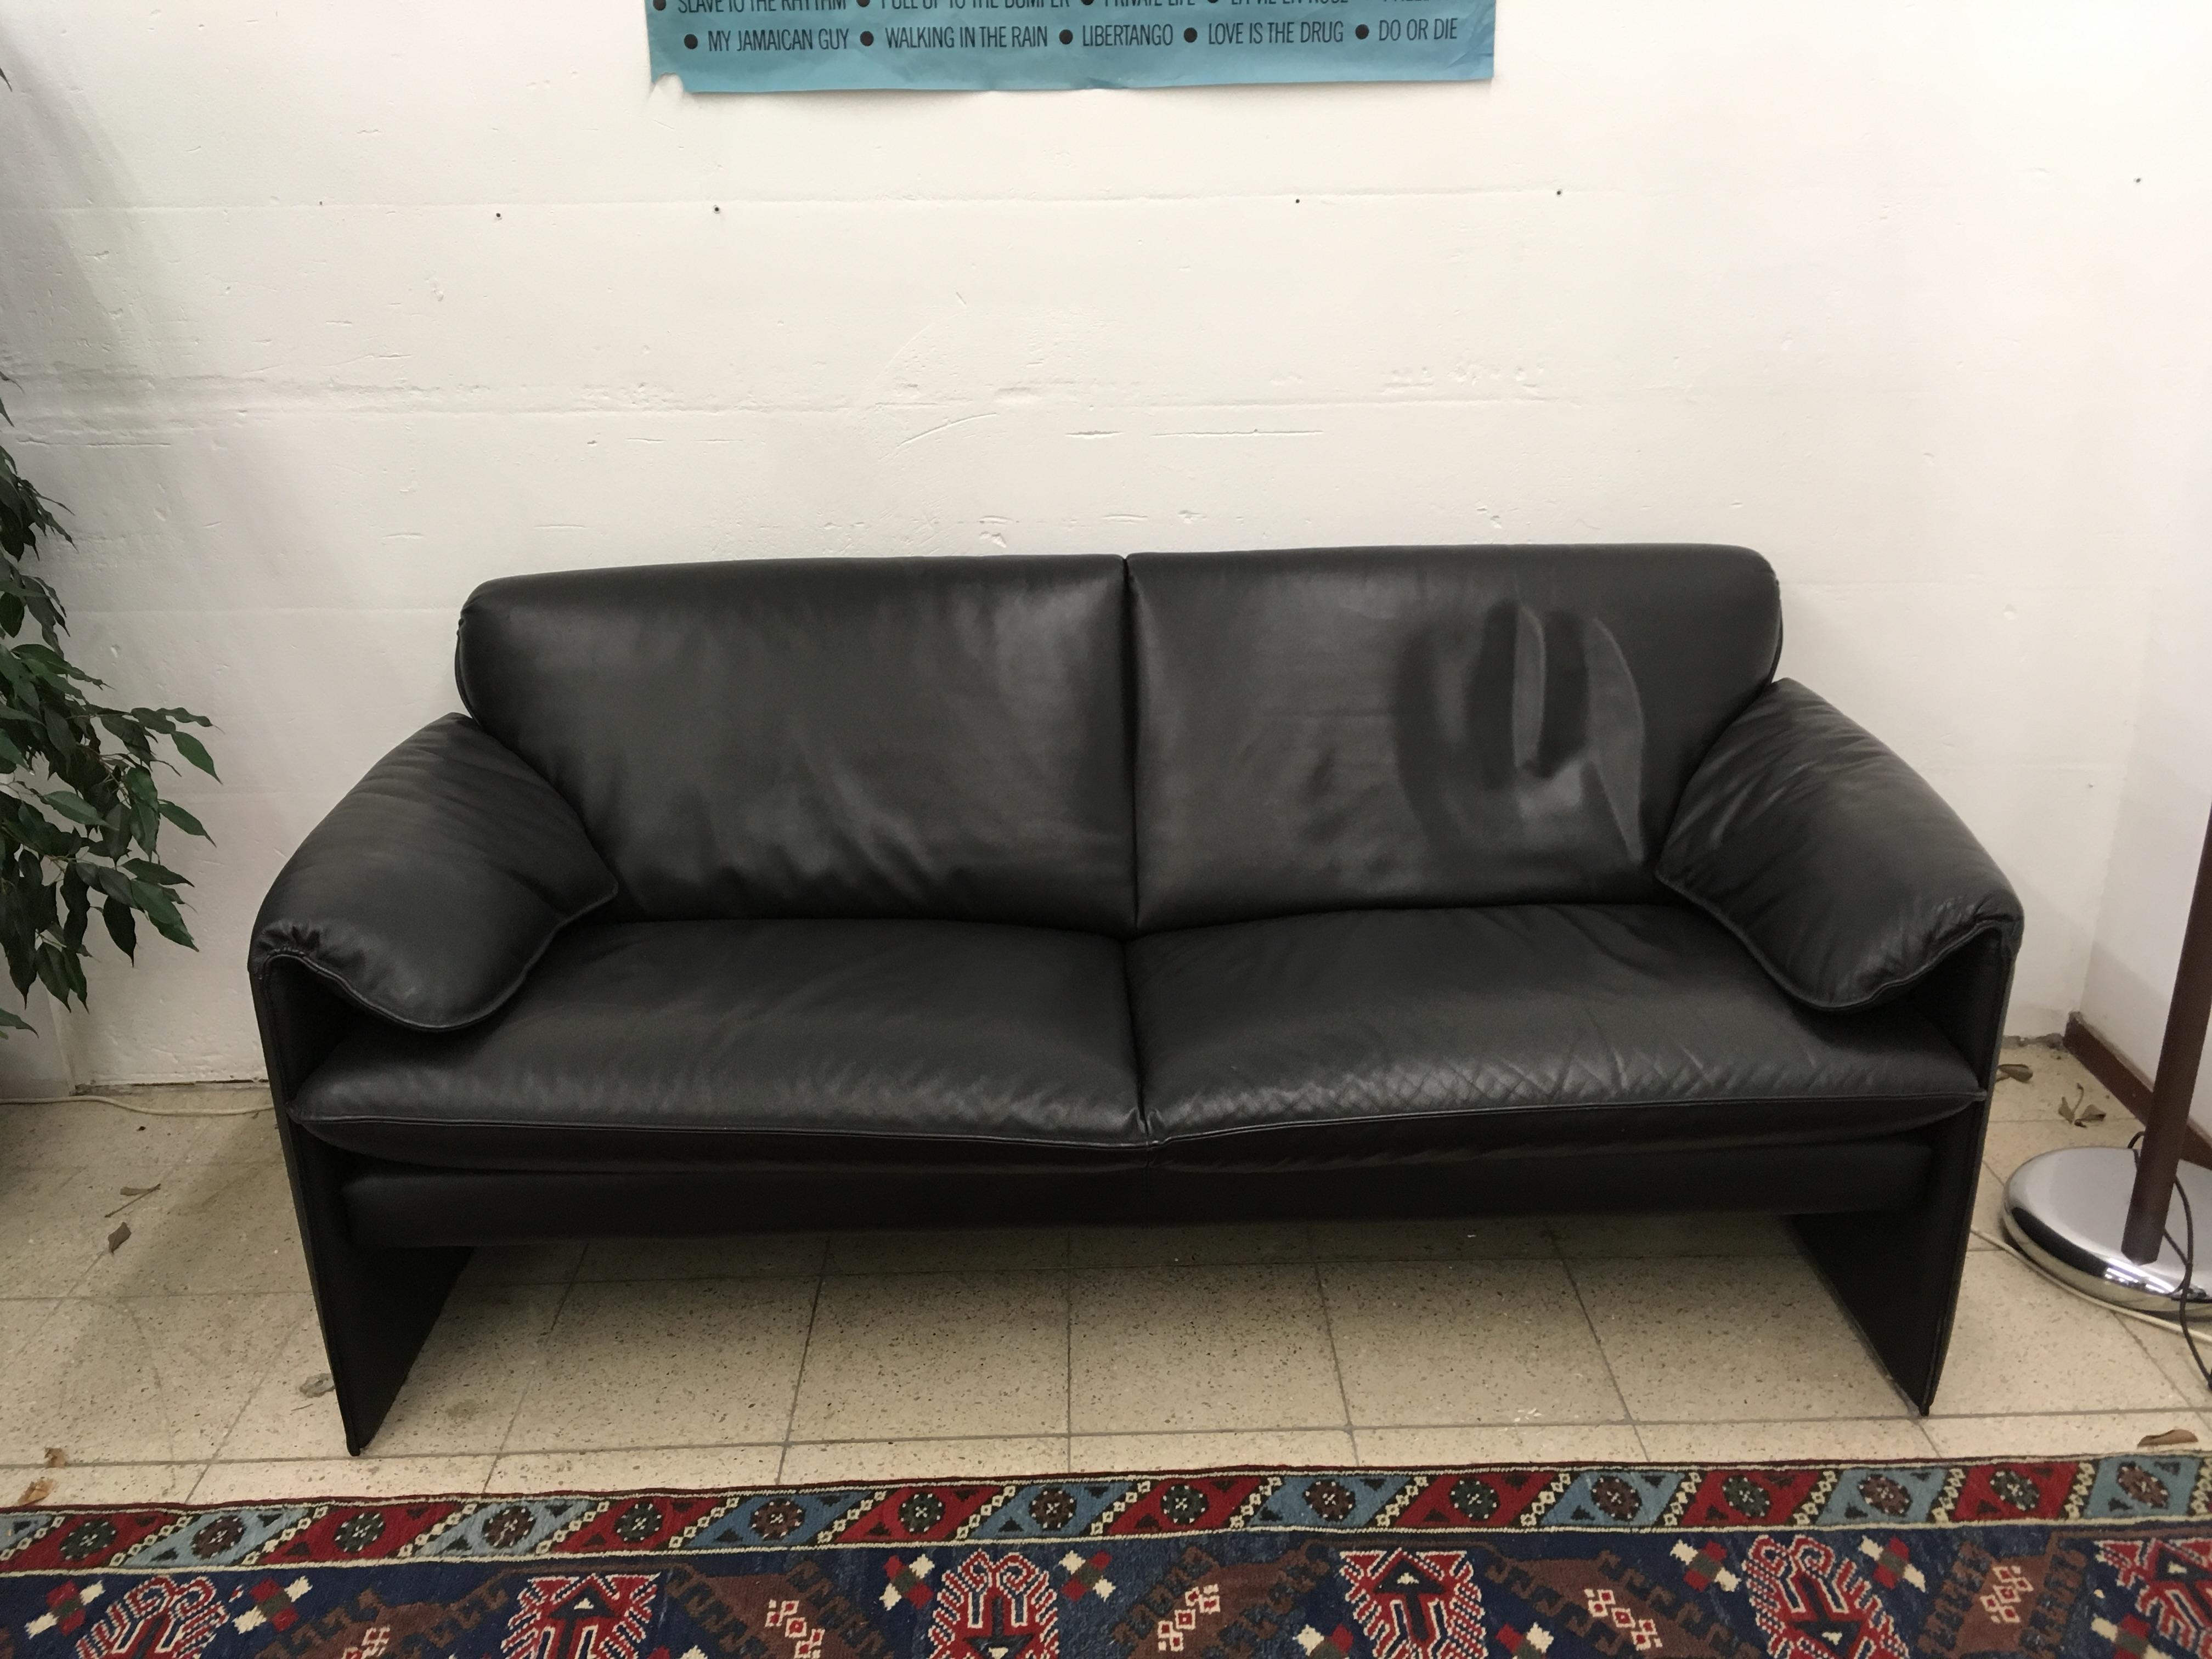 This 2.5-seat black leather sofa was designed by Axel Enthoven for Leolux in 1983. It has a comfortable seat and remains in good vintage condition with light traces of age and use. The piece wears the manufacturer's label. 